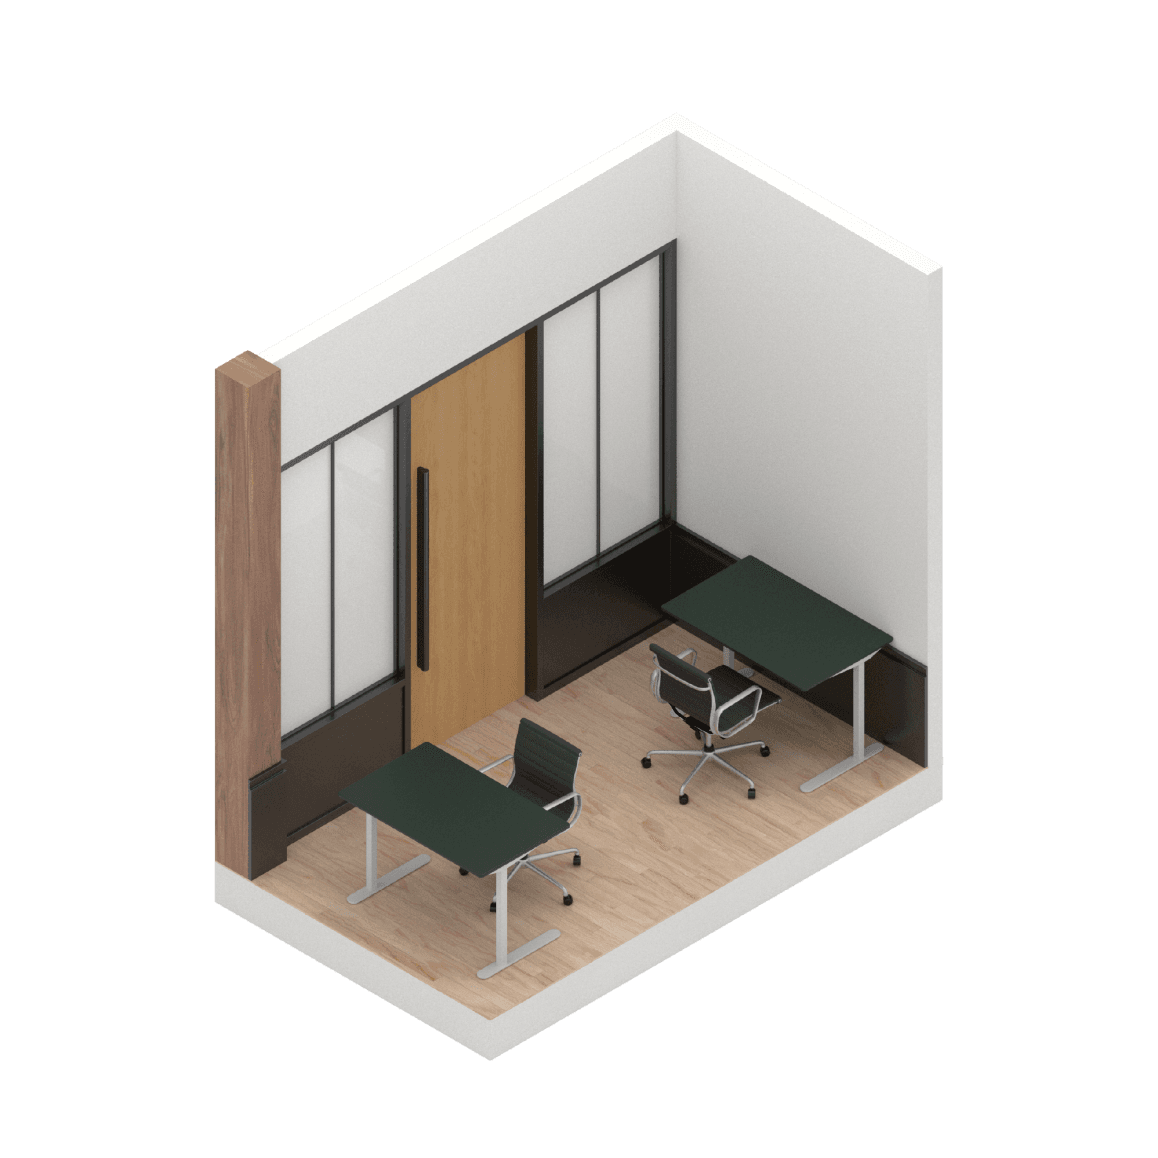 Private, lockable office space space